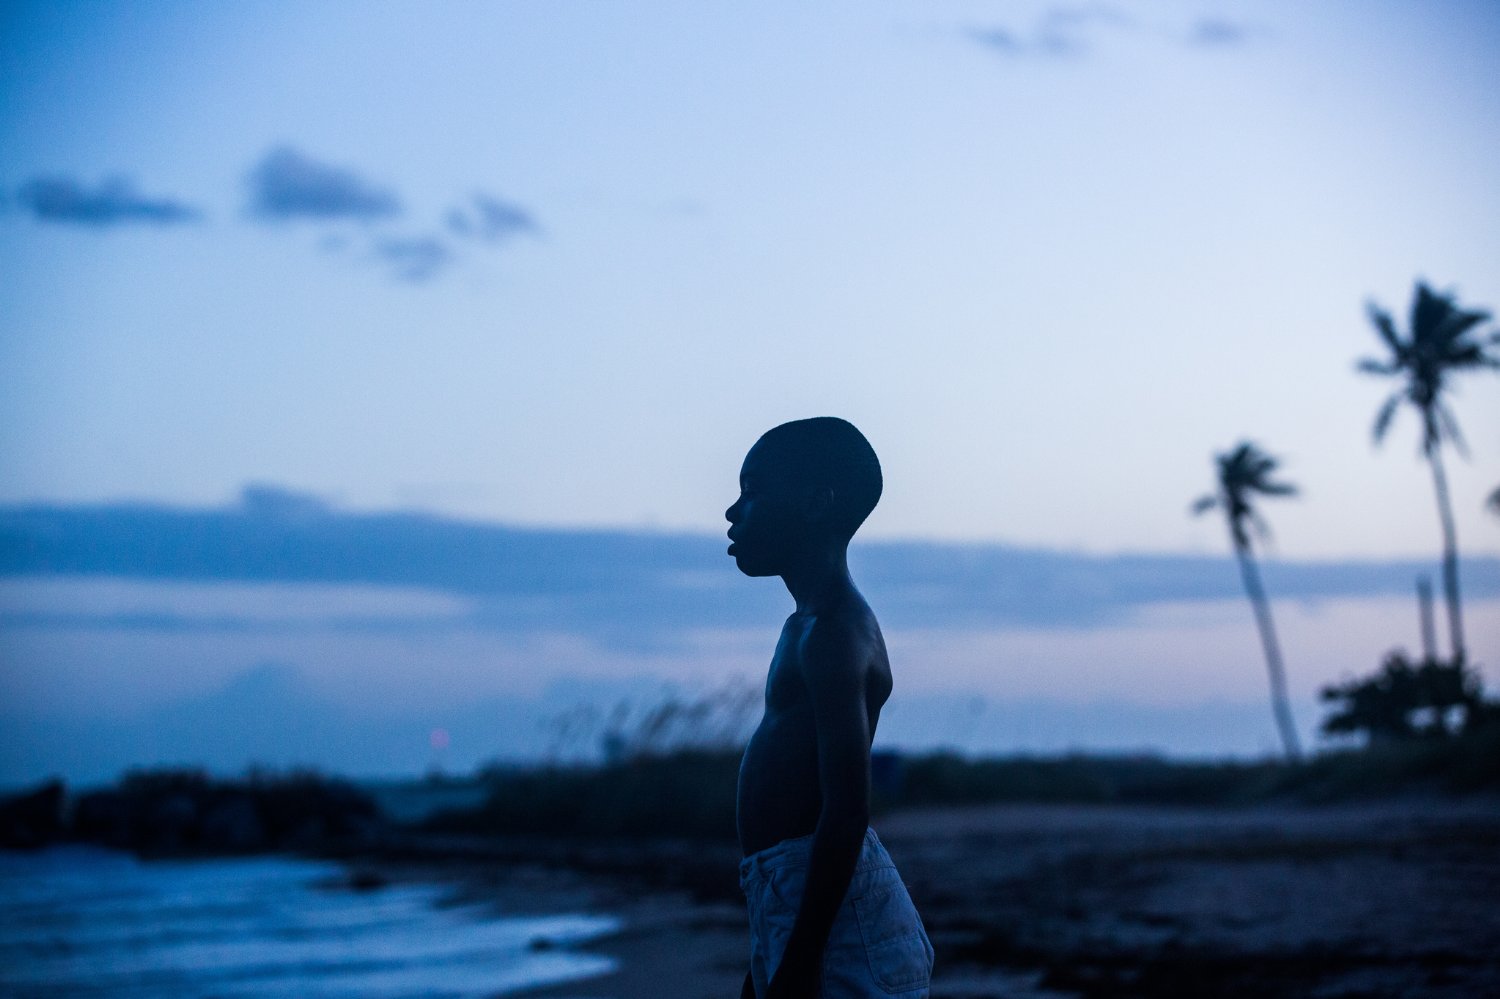 MOONLIGHT Is A Seamless Coming-of-age Portrait